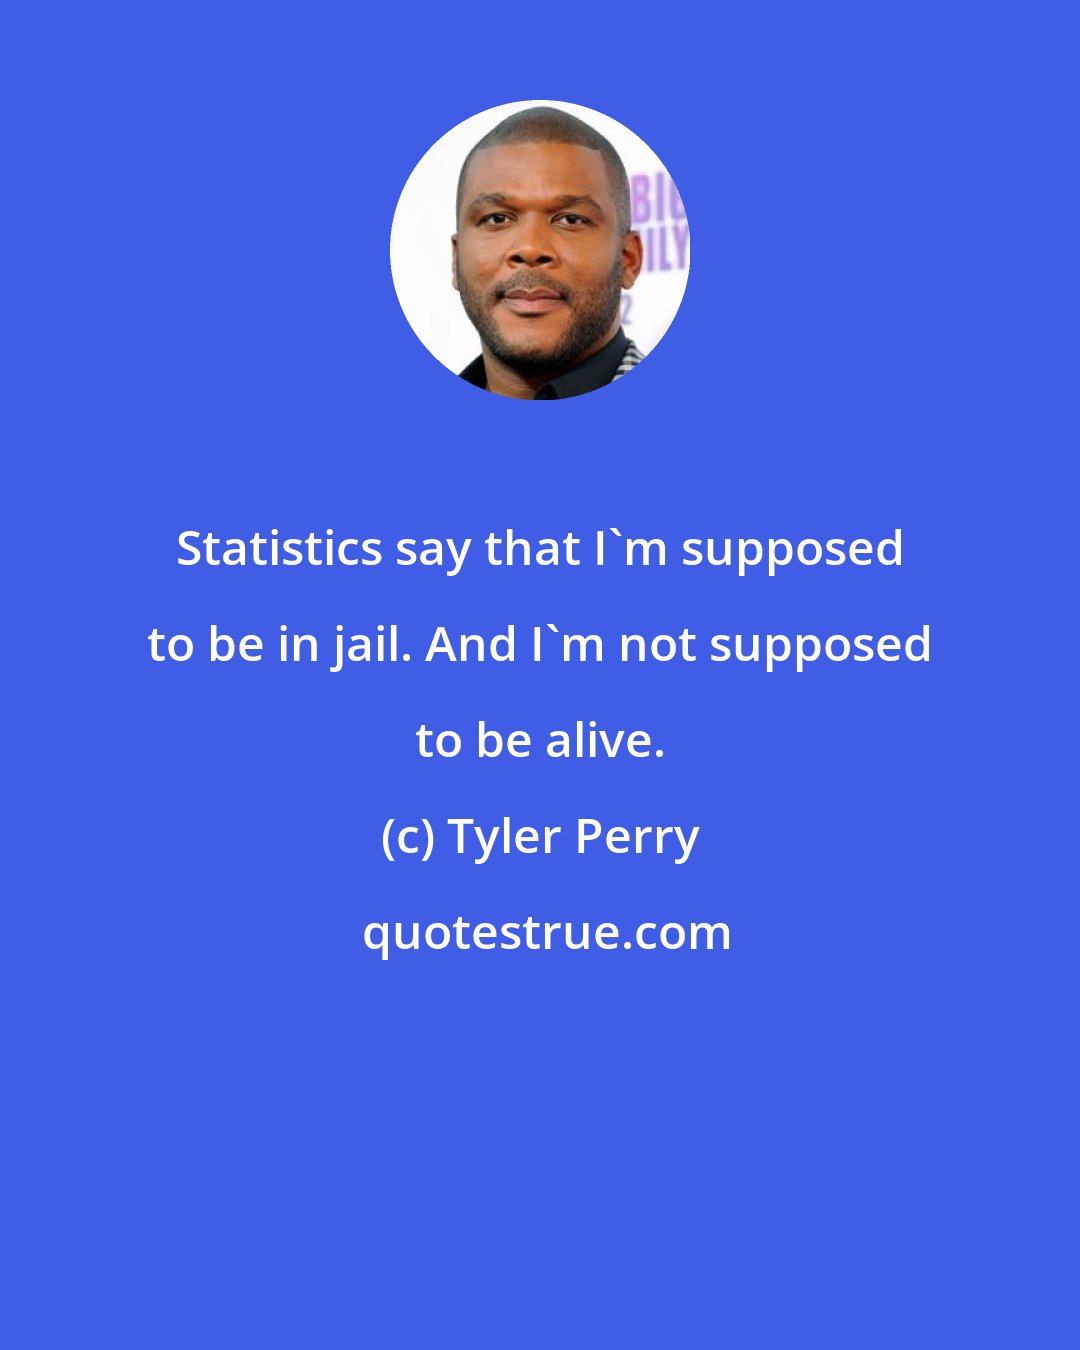 Tyler Perry: Statistics say that I'm supposed to be in jail. And I'm not supposed to be alive.